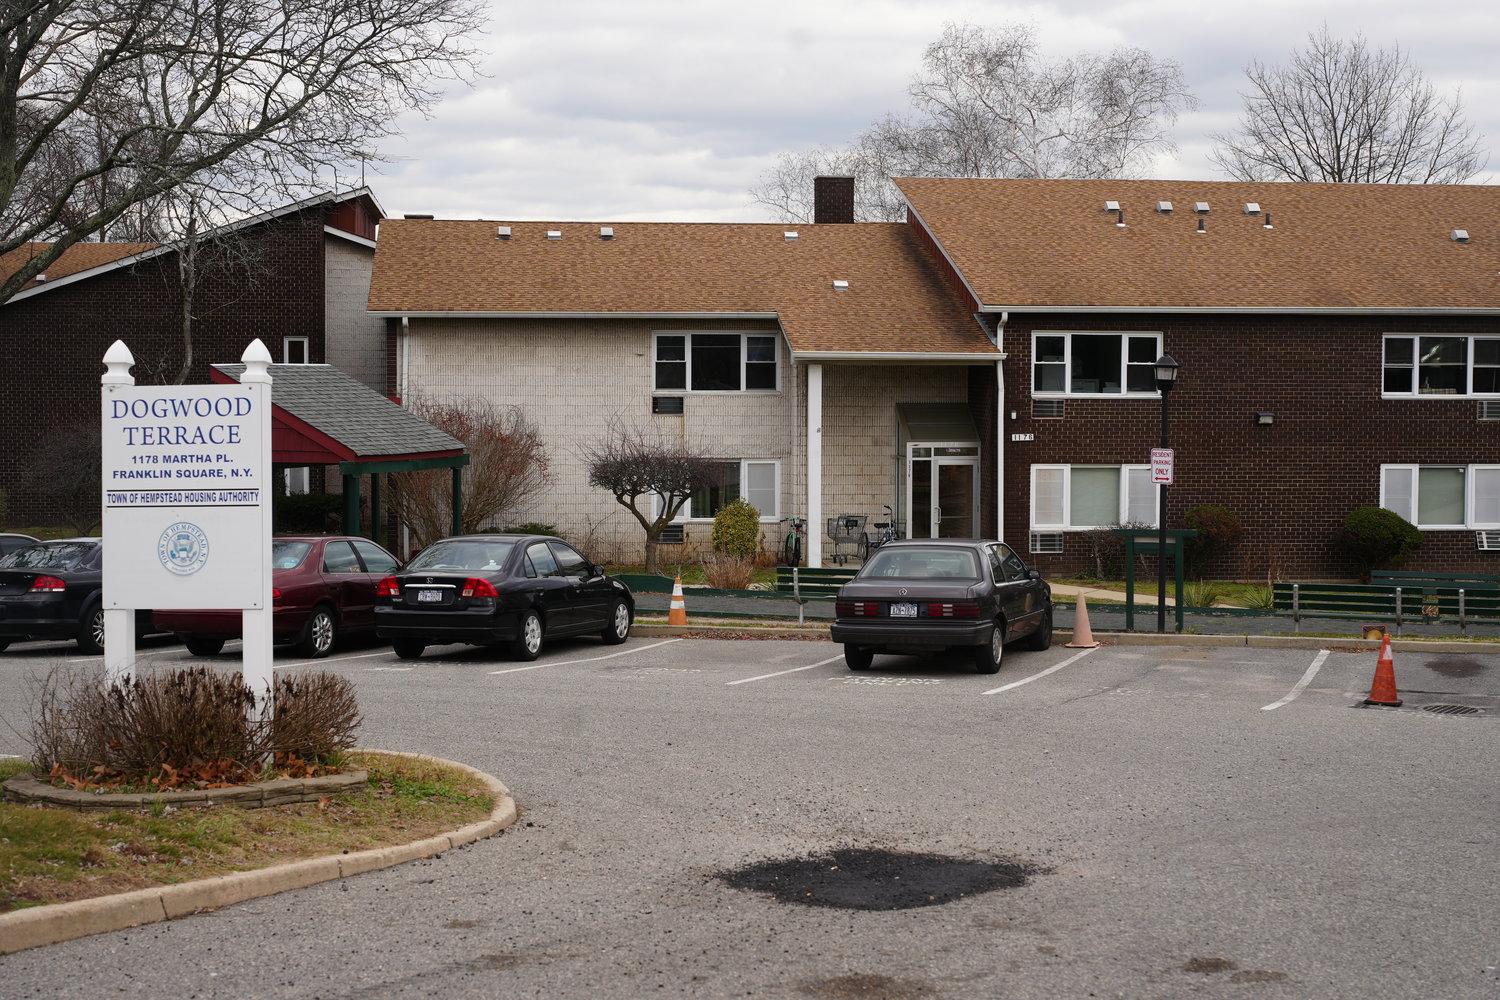 The Dogwood Terrace senior apartment complex, operated by the Town of Hempstead Housing Authority, has not undergone renovations since it was built in the 1970s. The town proposes to remake the property into a modernized, four-story, affordable senior housing development.